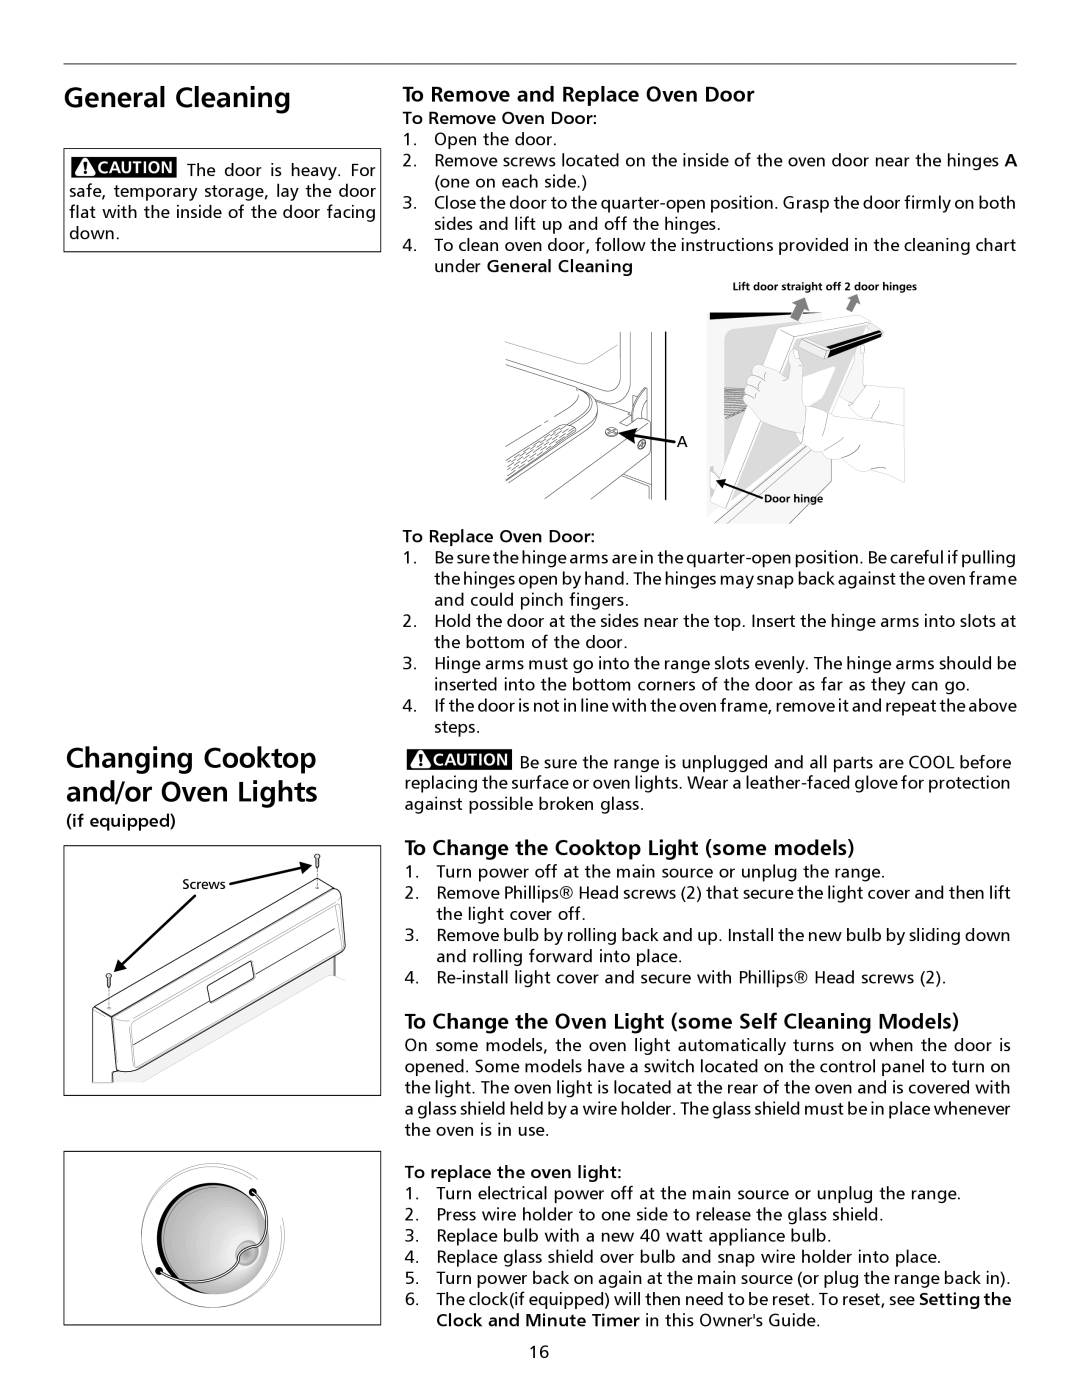 Frigidaire 316135917 Changing Cooktop and/or Oven Lights, To Remove and Replace Oven Door, if equipped, General Cleaning 